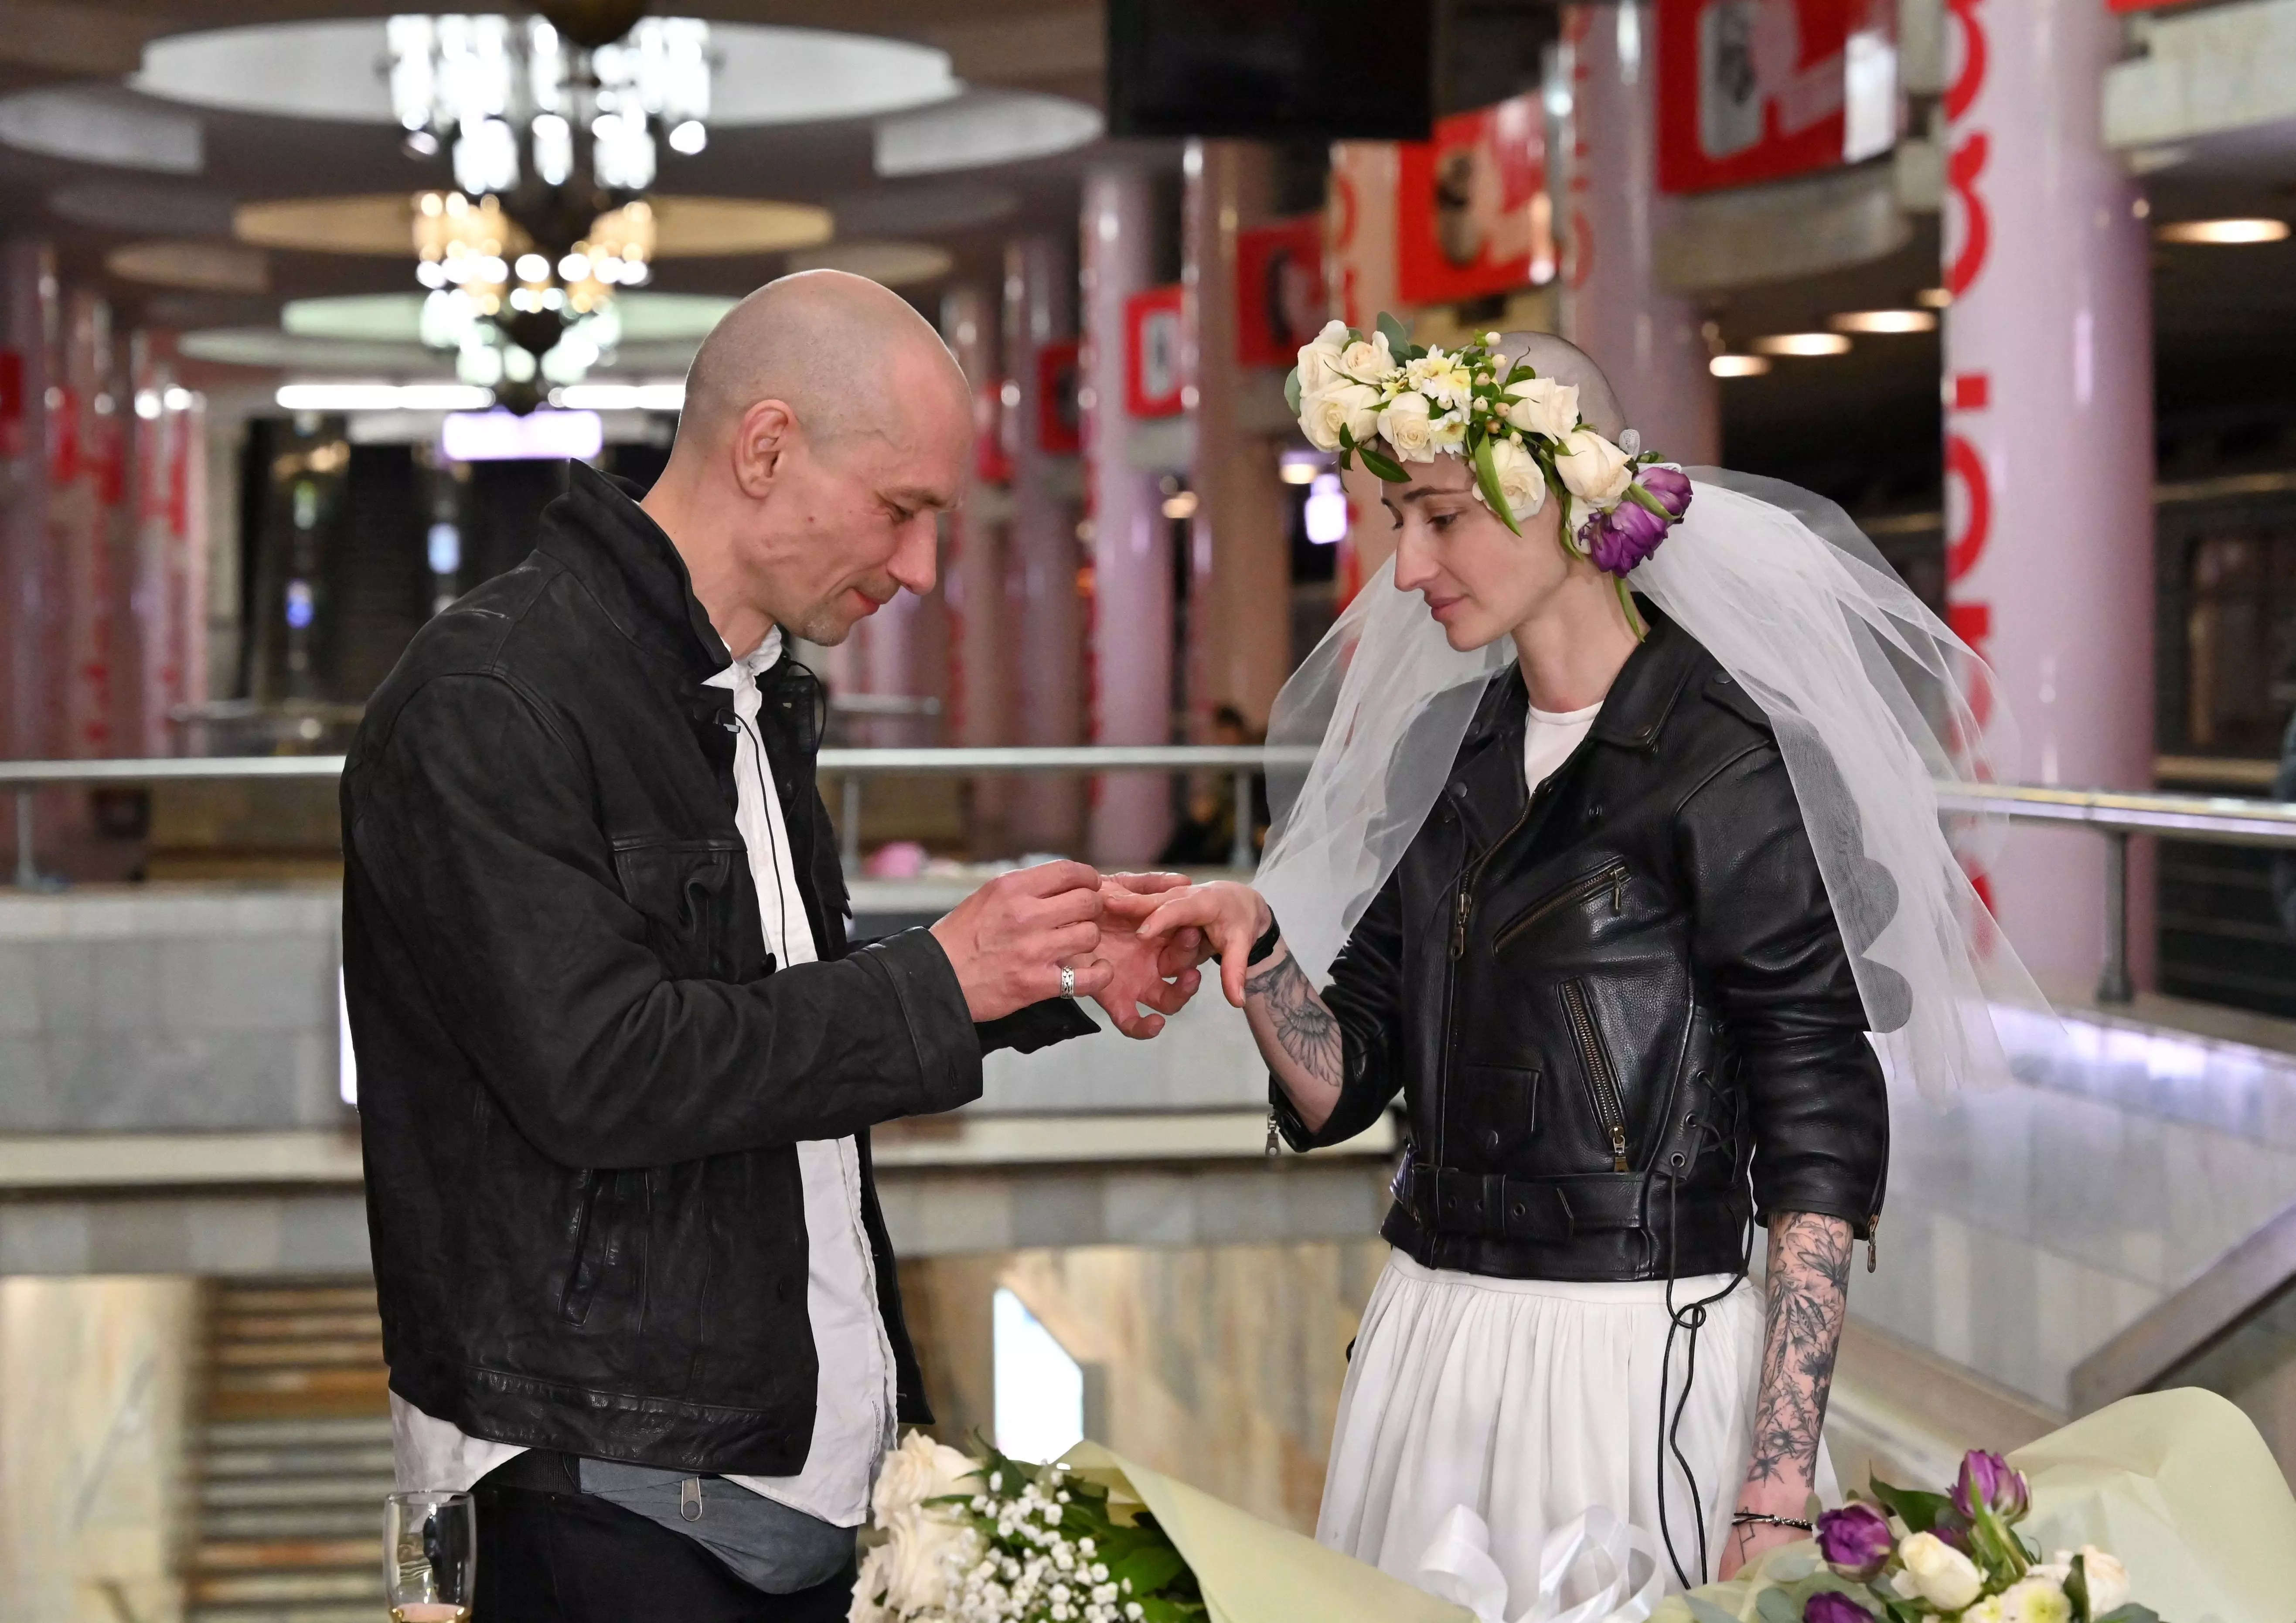 A Ukrainian couple get married in a metro station.